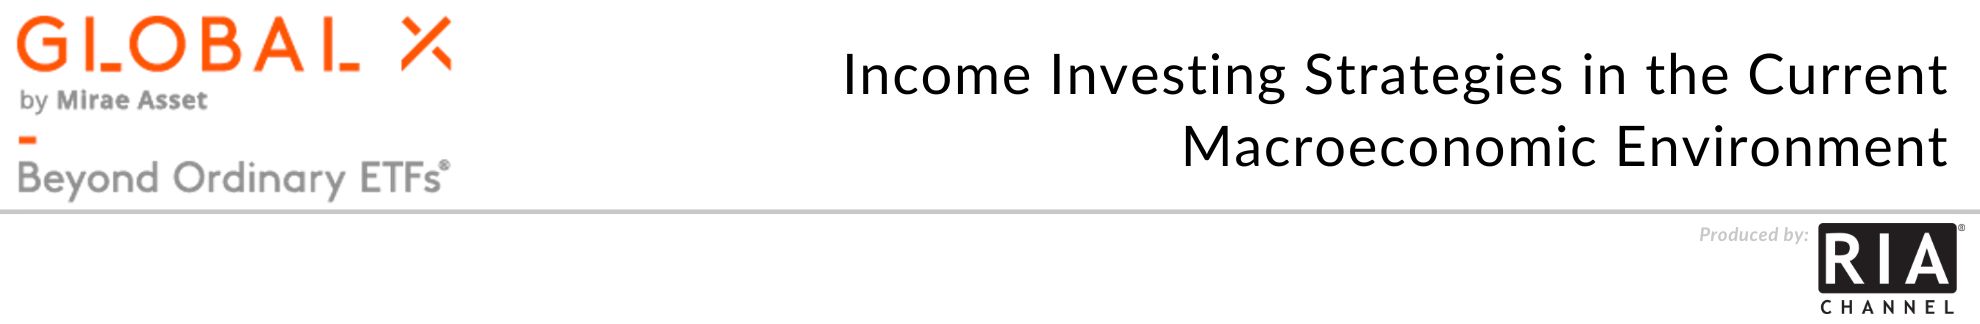 Income Investing Strategies in the Current Macroeconomic Environment

